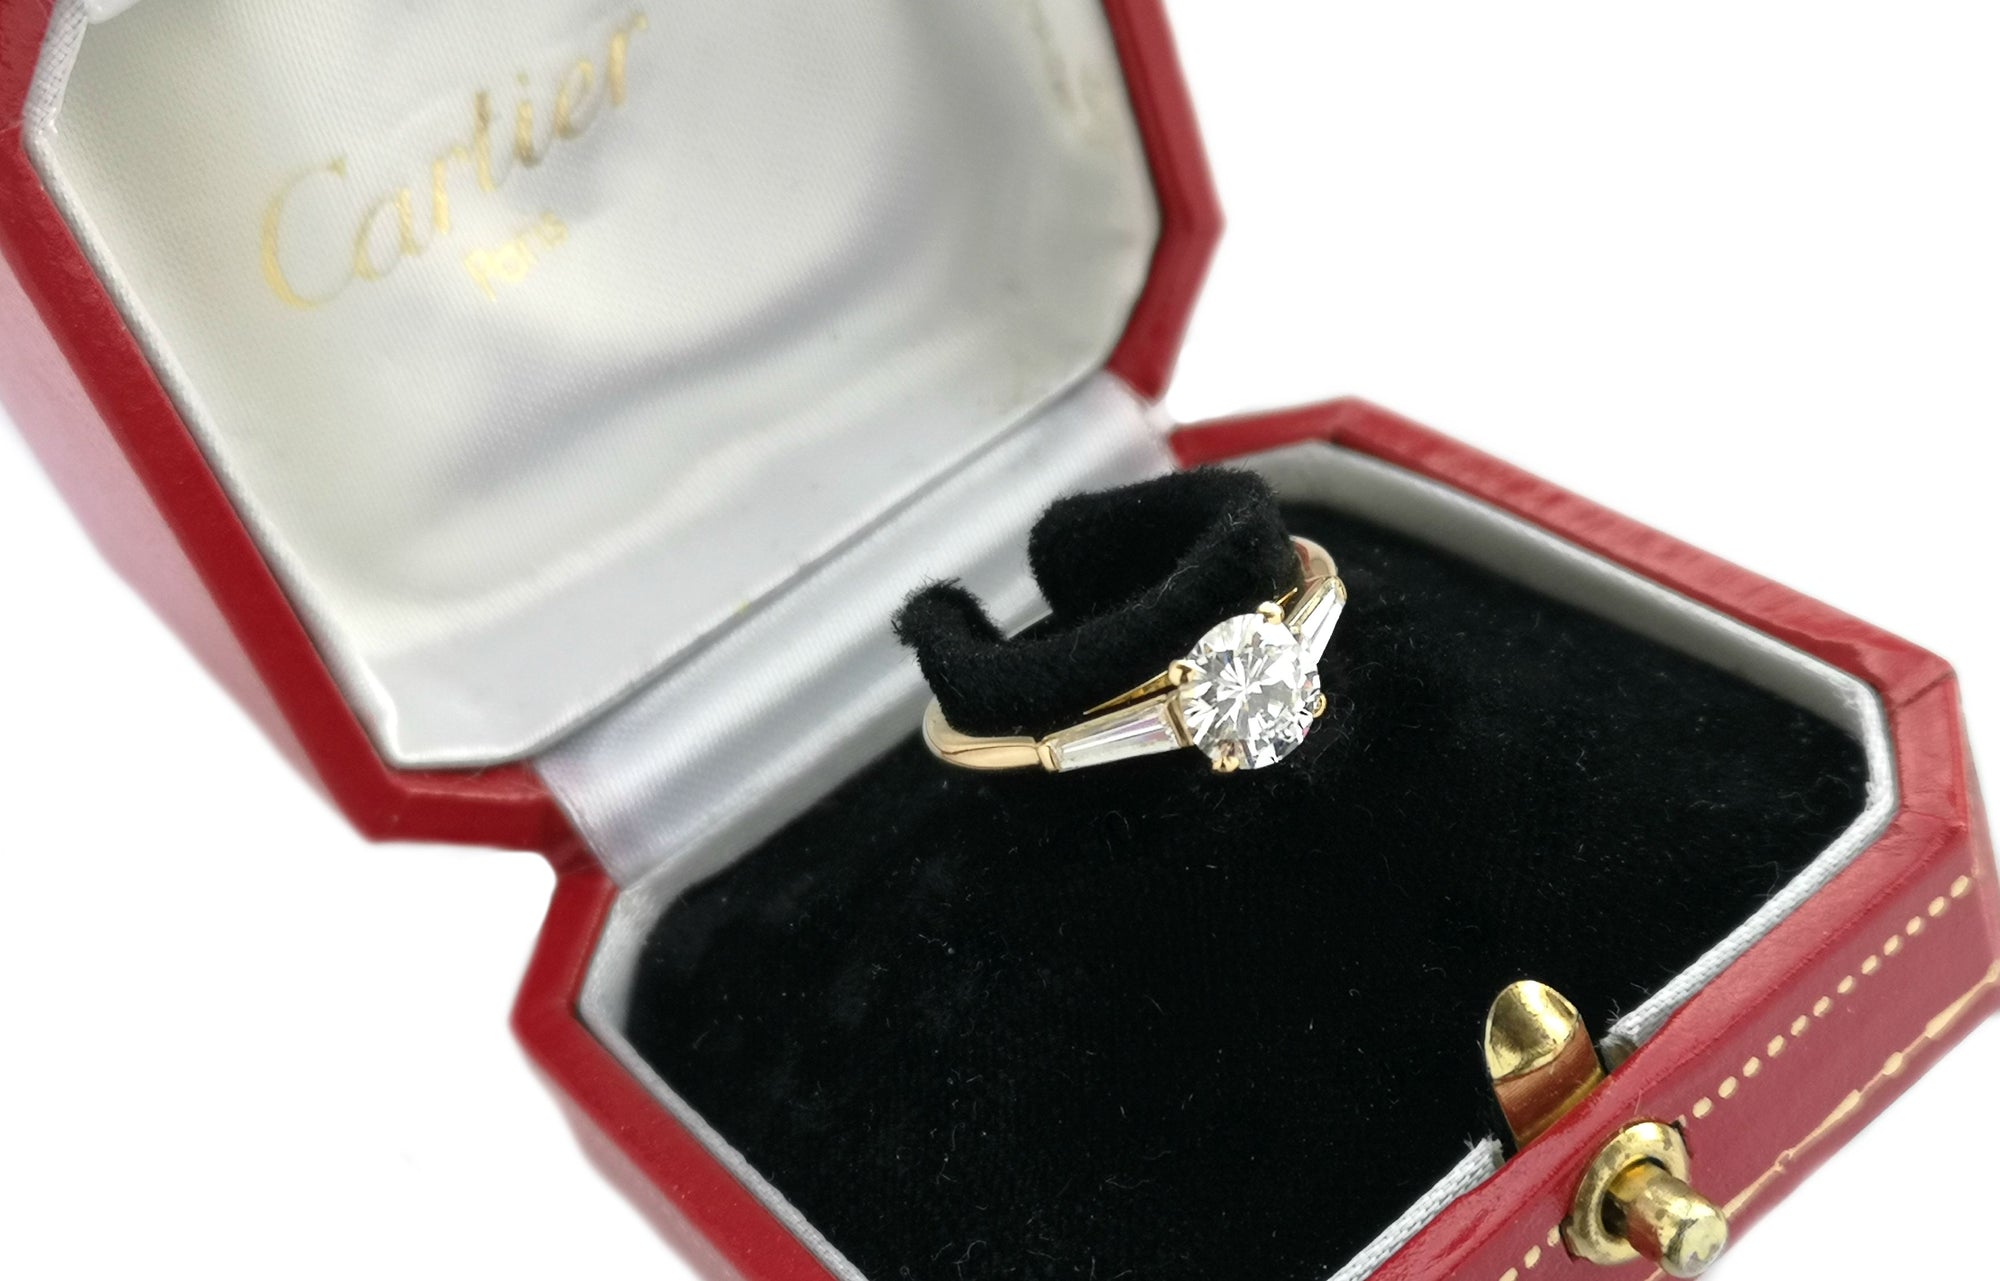 Cartier 1.01ct D/VVS2 Round Brilliant & Tapered Baguette Diamond Engagement Ring in 18K Gold in box